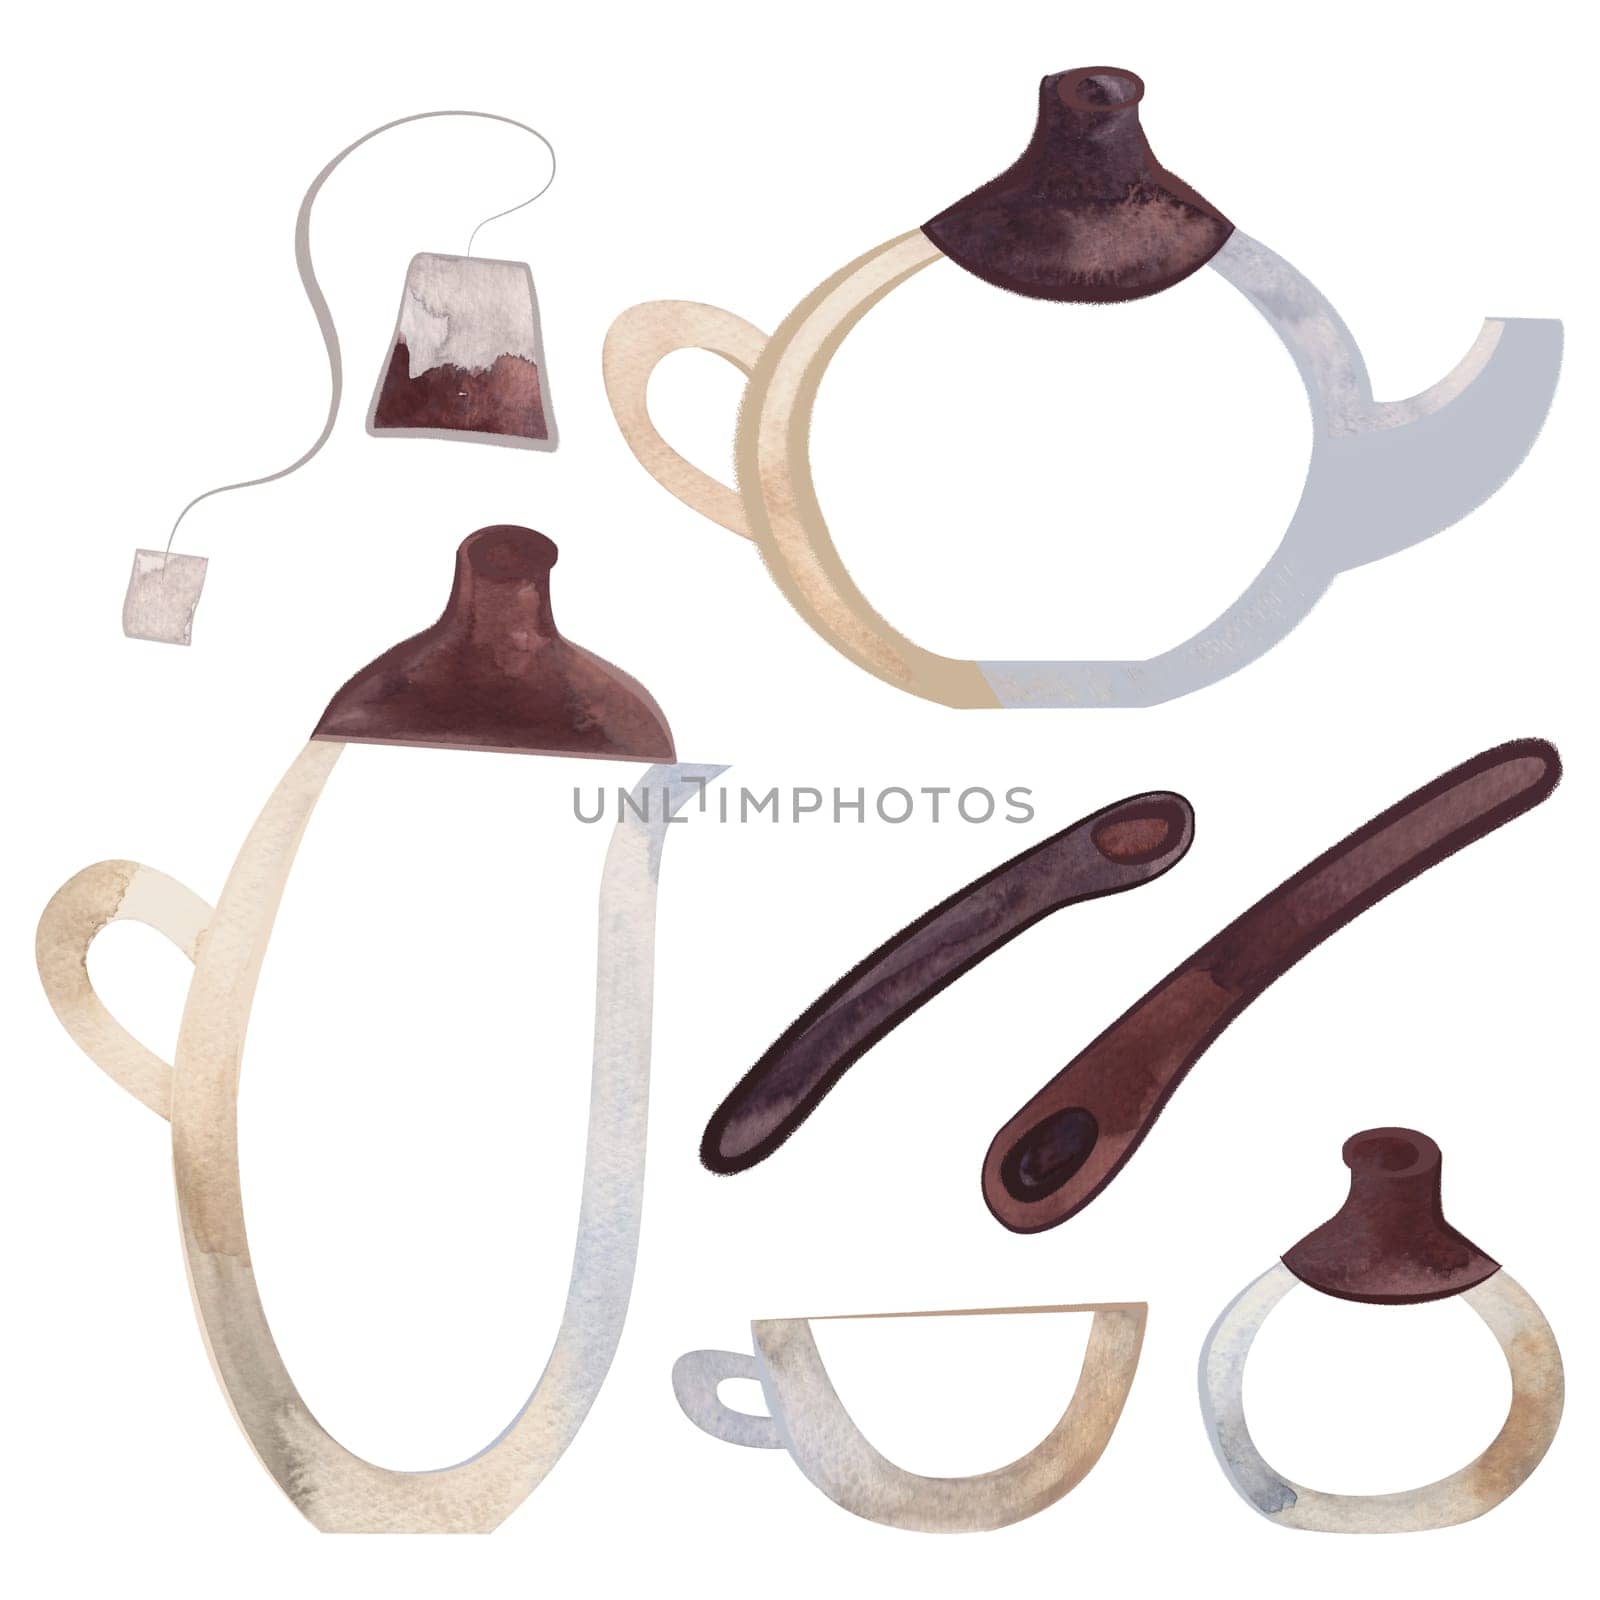 Set of empty transparent glassware with dark brown wooden decor in sketch style: teapot, cup, lemonade jug, sugar bowl, spoons. Clipart. Isolated watercolor illustration on a white background for the design of menus, tea and coffee shops.